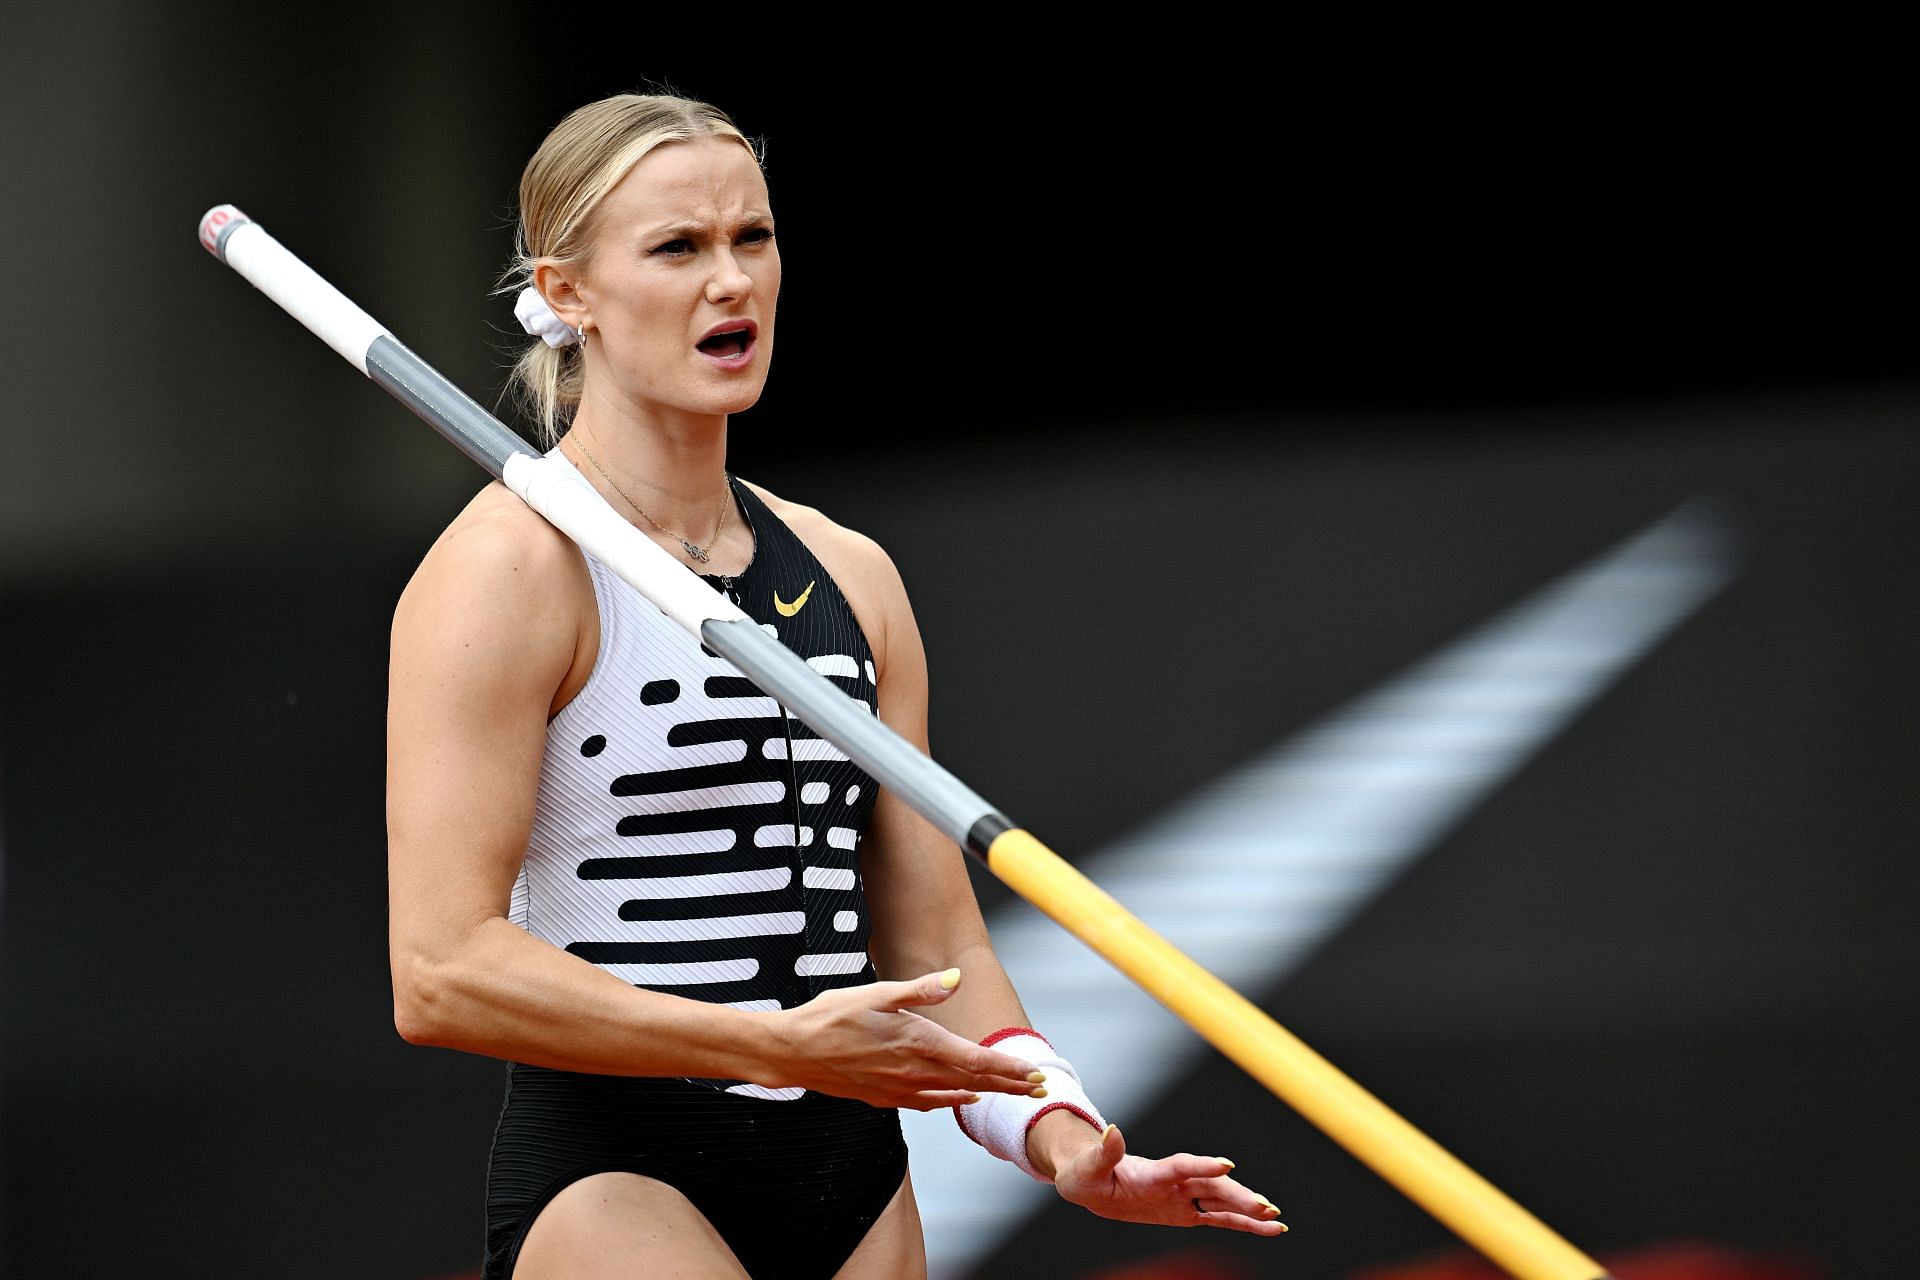 Katie Moon prepares for a jump at the London Athletics Meet, part of the 2023 Diamond League